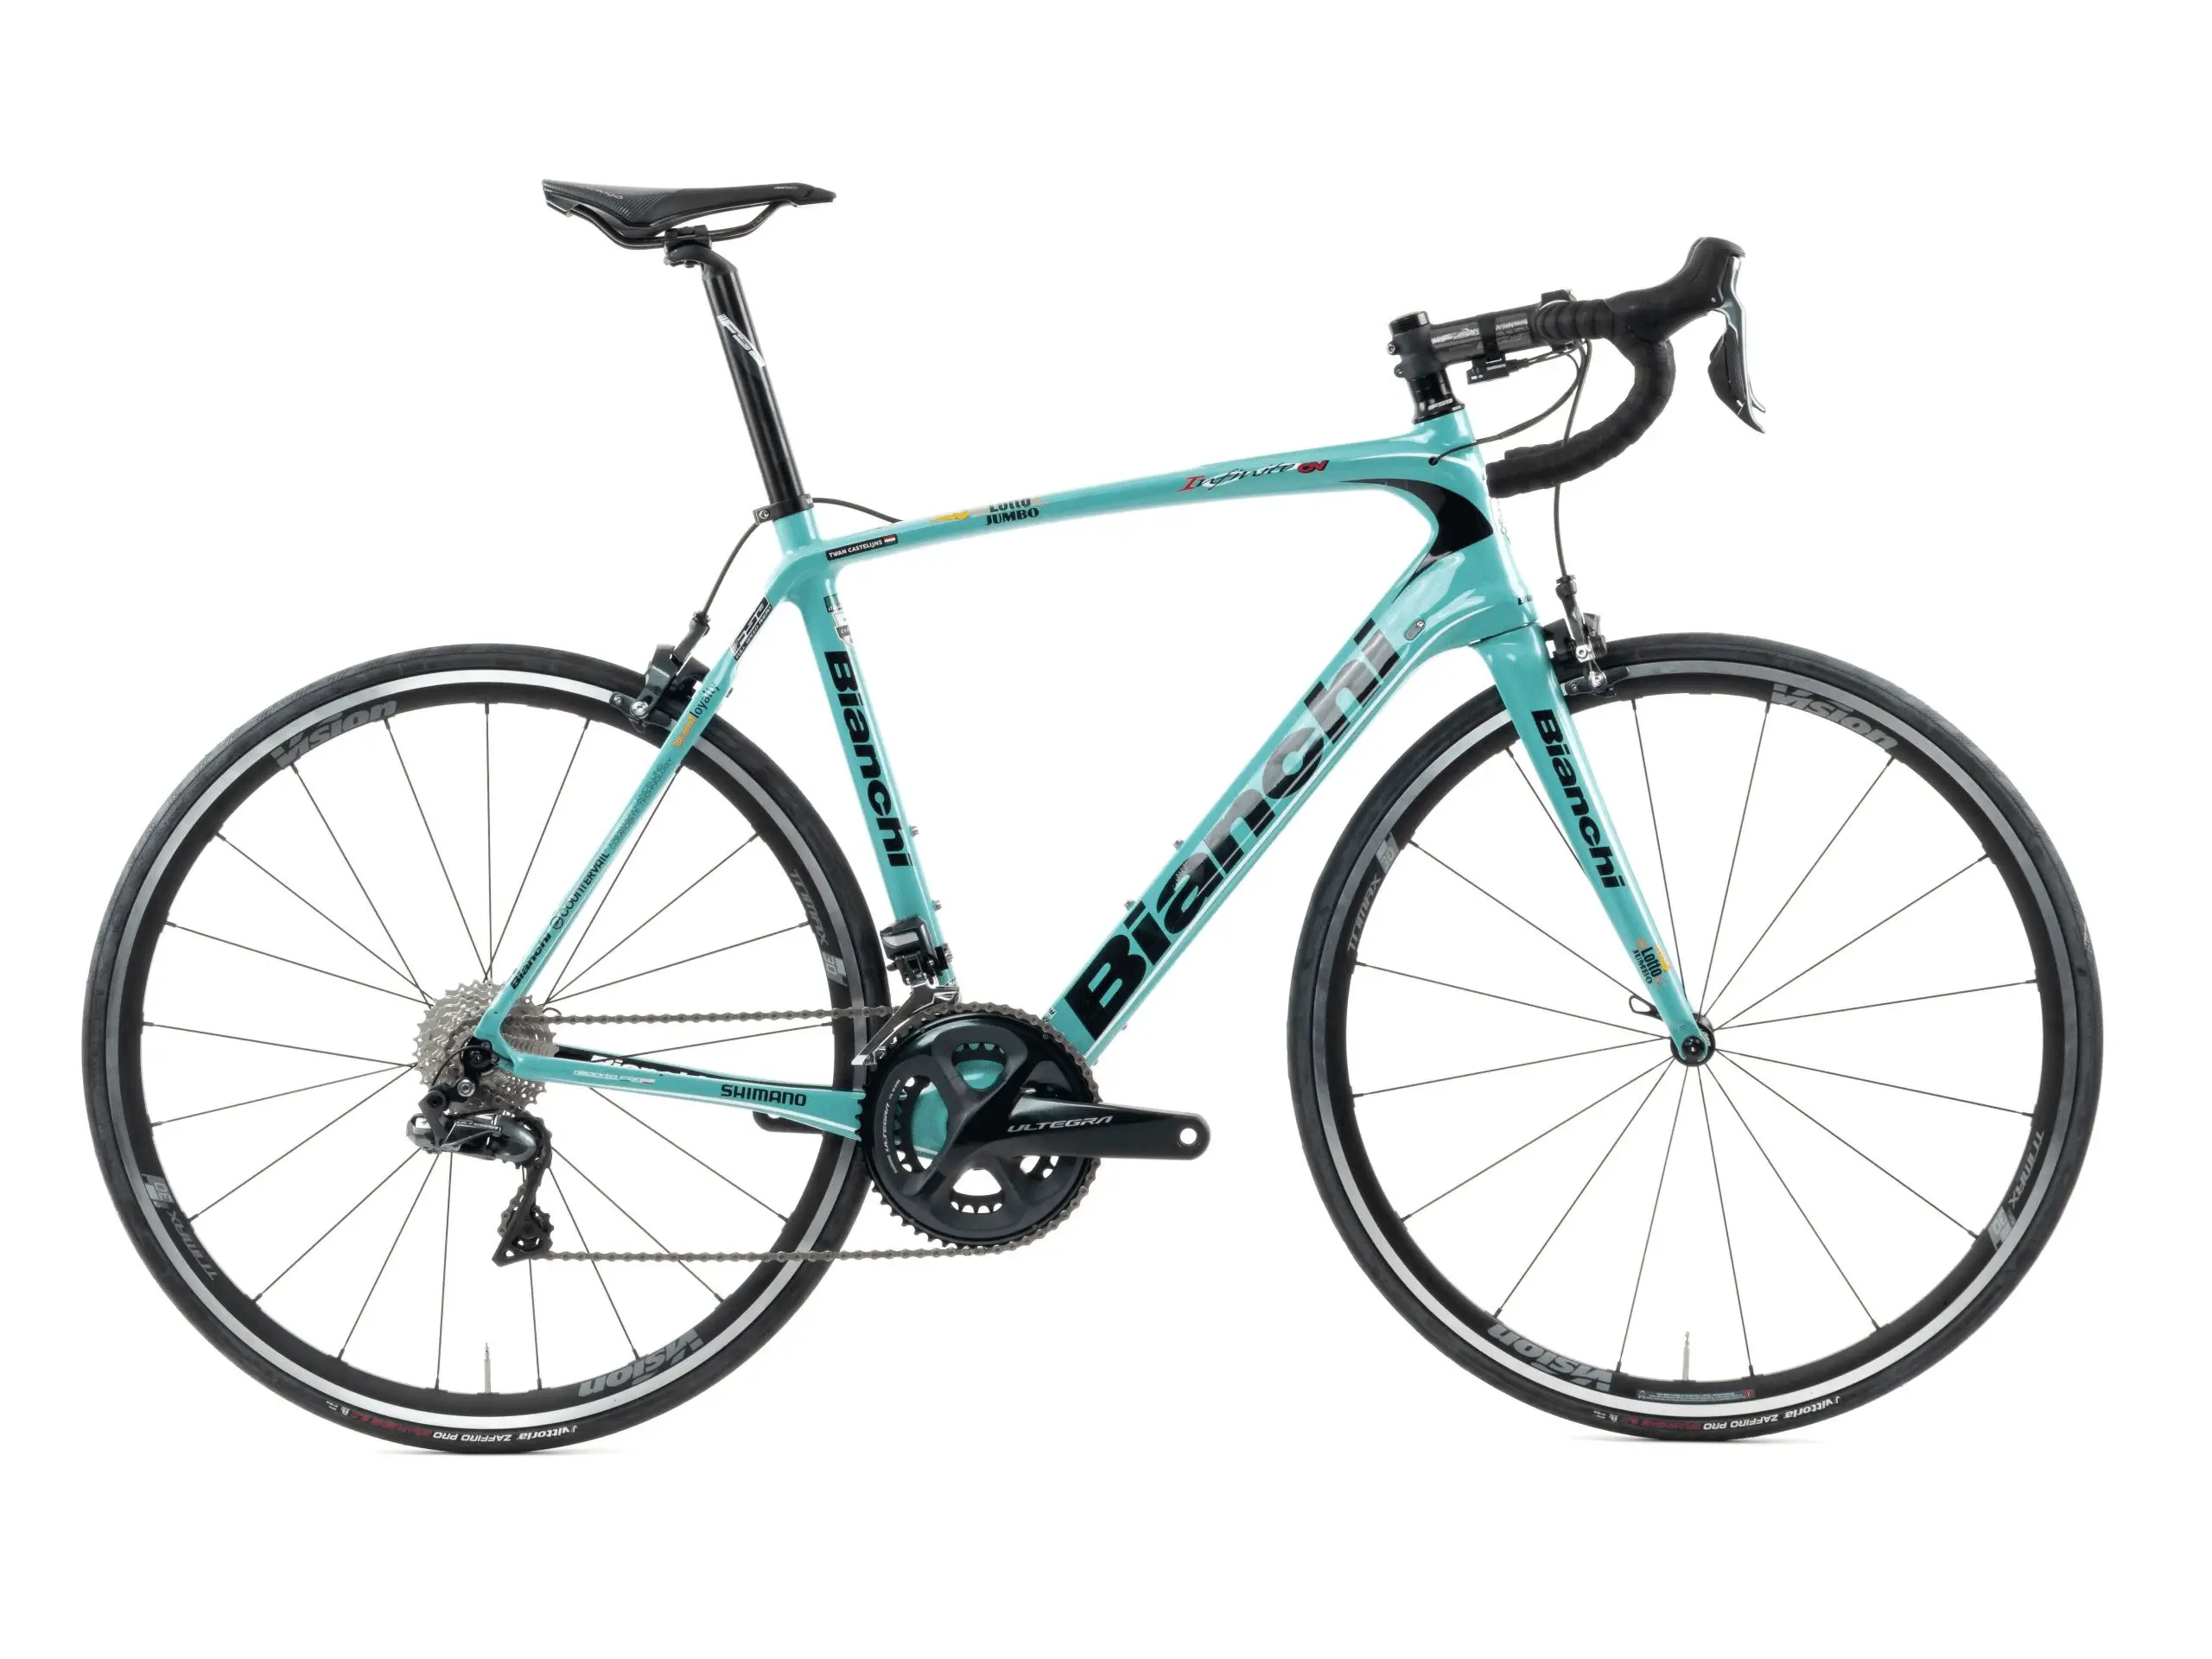 Bianchi Infinito CV Ultegra used in 57 cm | buycycle